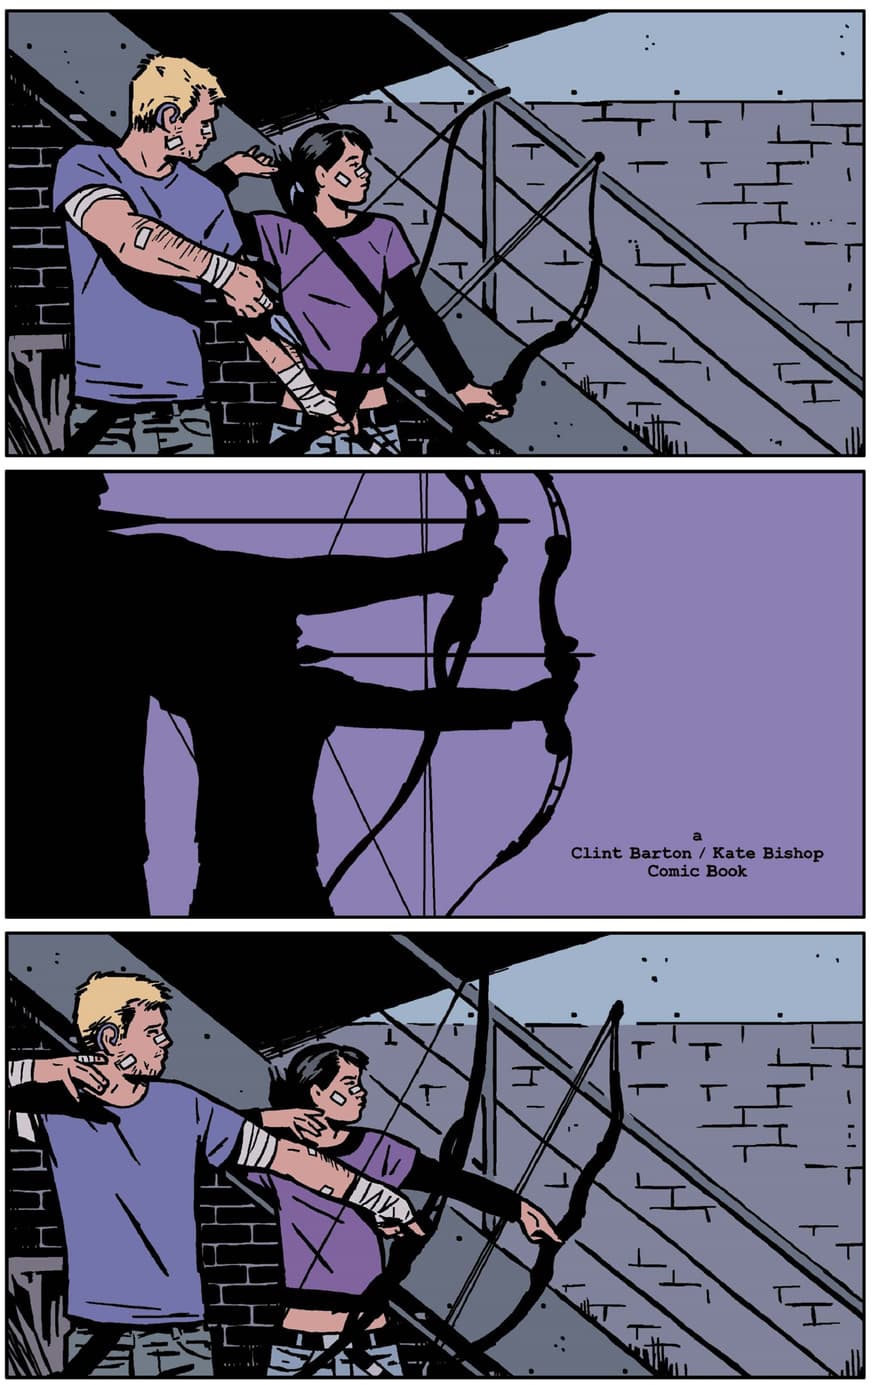 Top 10 Moments from 'Hawkeye' by Matt Fraction and David Aja | Marvel